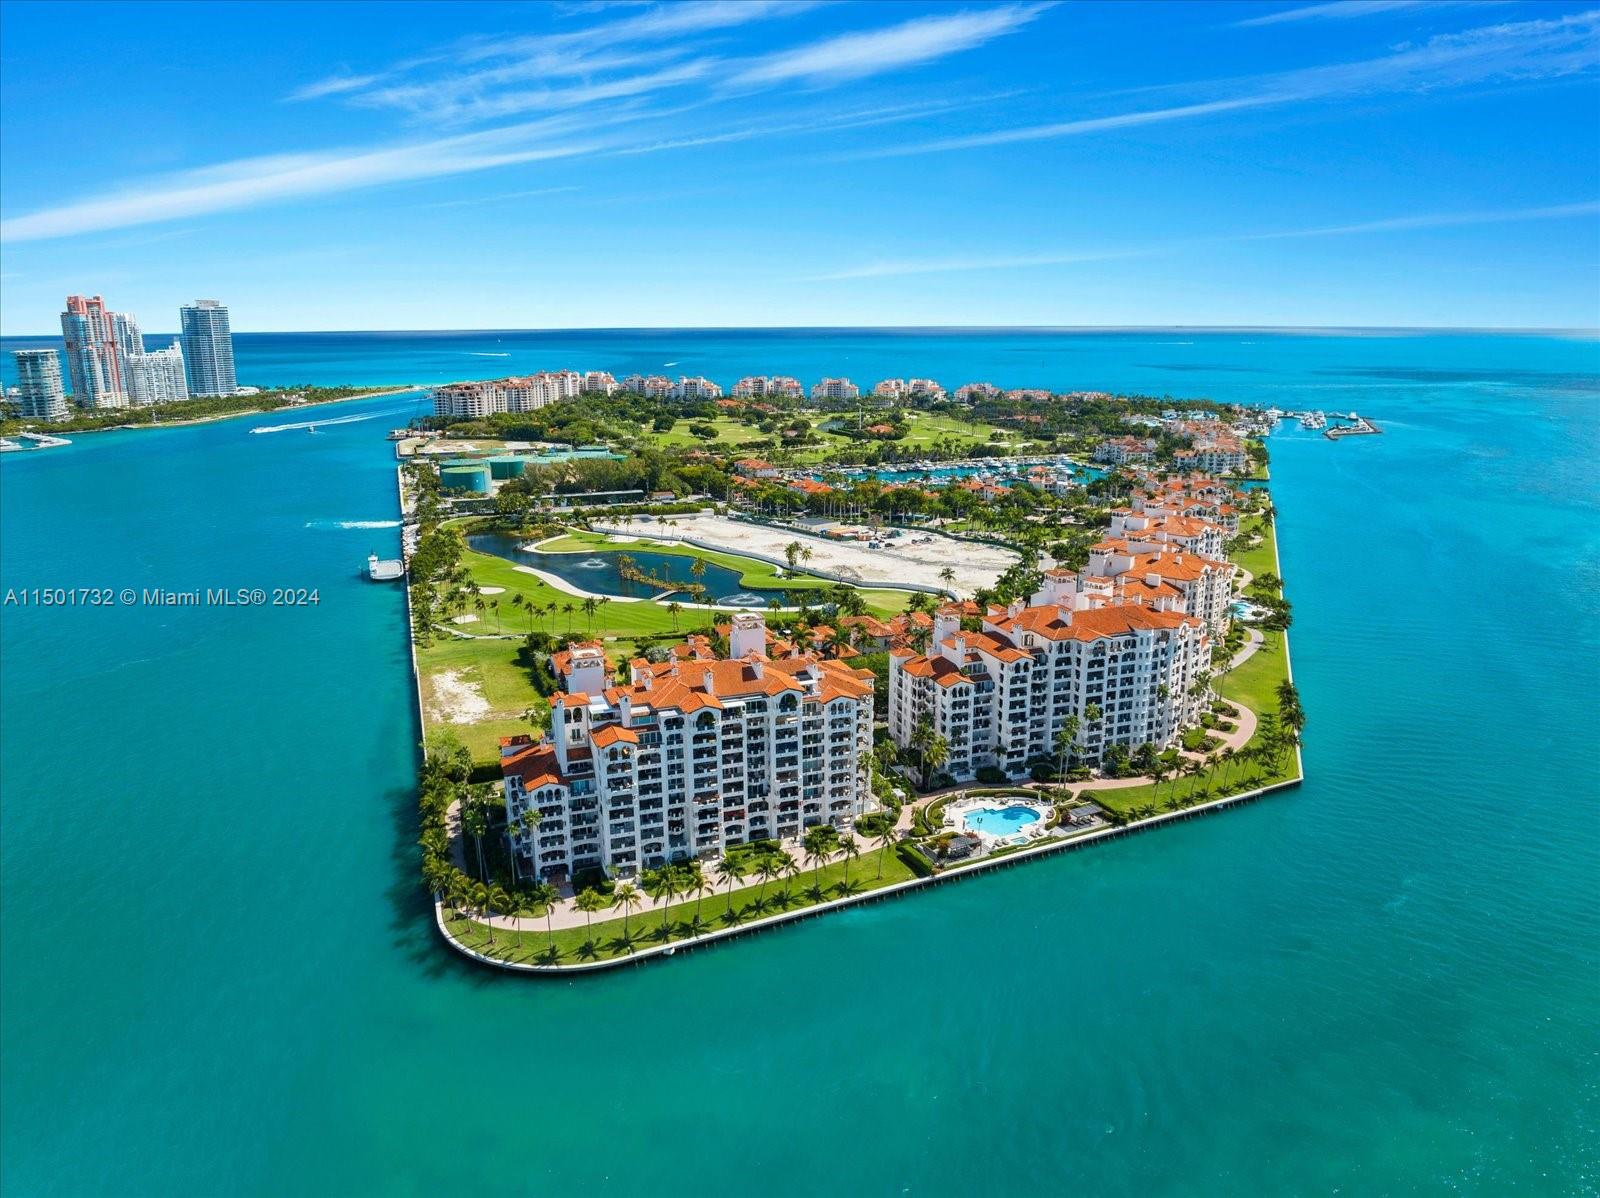 Experience the epitome of Fisher Island living in this stunning completely renovated Bayview unit professionally designed and decorated with no expense spared, ensuring an unparalleled experience! Indulge in the luxurious comfort of 4 bedrooms, 4.5 baths and a spacious 3,790 sq ft interior open floor plan. Be enchanted by sweeping views of the Miami downtown skyline with expansive terraces ideal for entertaining. Features include: two spacious principal bedrooms with terraces overlooking Biscayne Bay and downtown Miami, wine cellars, elegant marble floors throughout, gourmet kitchen, top of the line appliances, impact glass doors, automated window treatments and countless of other features. Live the Fisher Island lifestyle in this exceptional unit that is offered fully furnished.